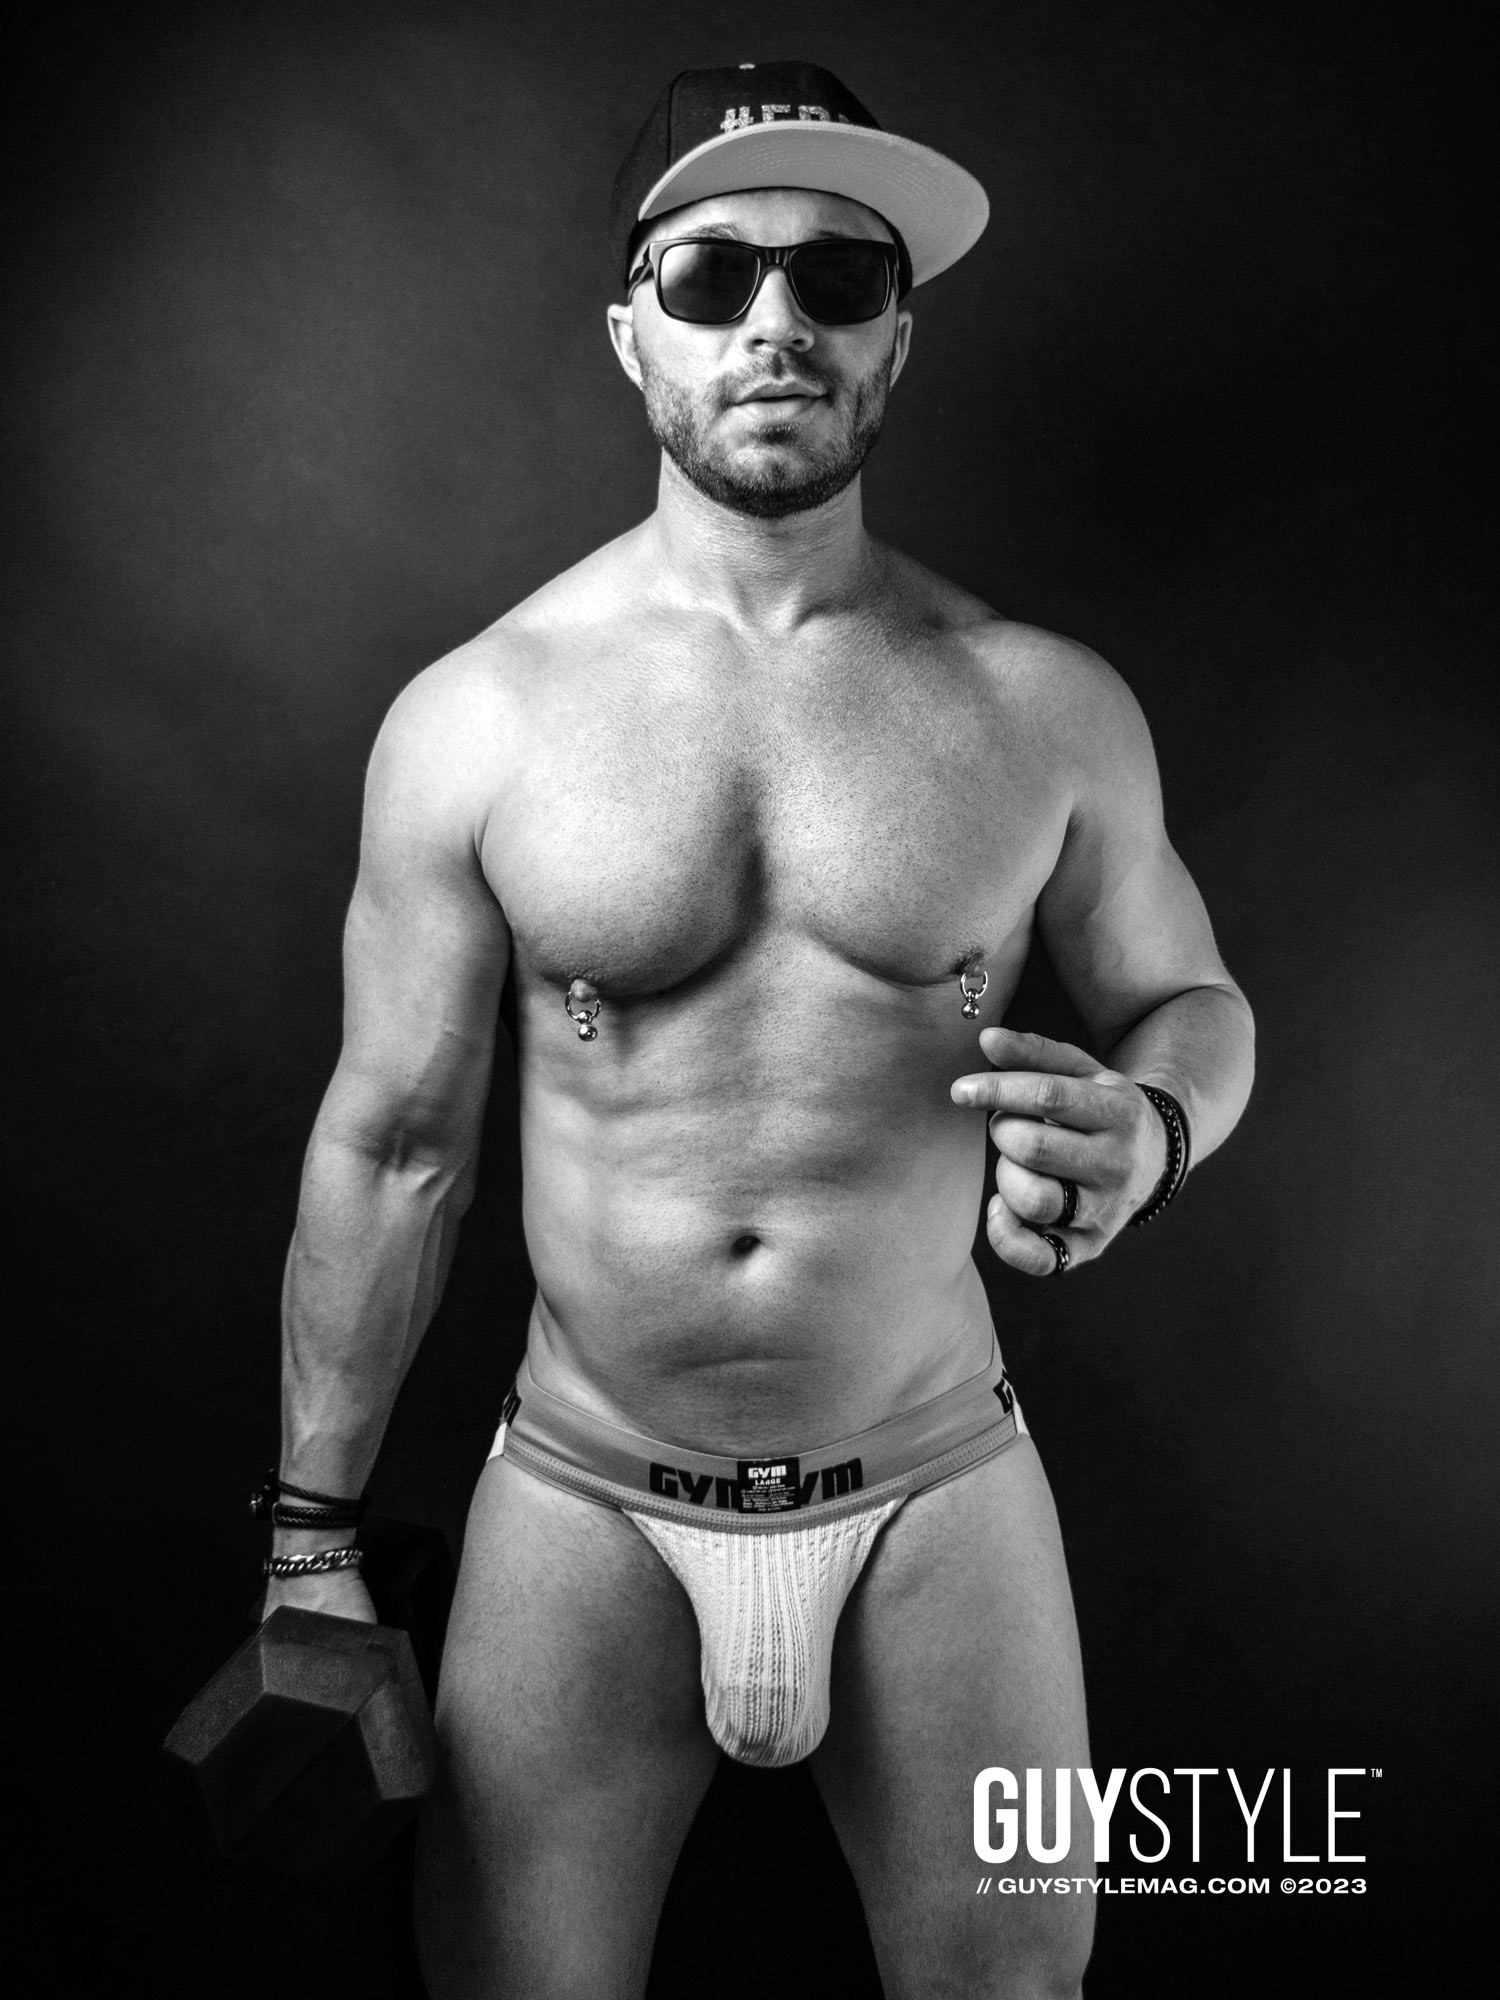 The Classic GYM Jockstrap: Athletic Elegance and Hefty Bulge Redefined – Men's Underwear Reviews with Fitness Model Maxwell Alexander